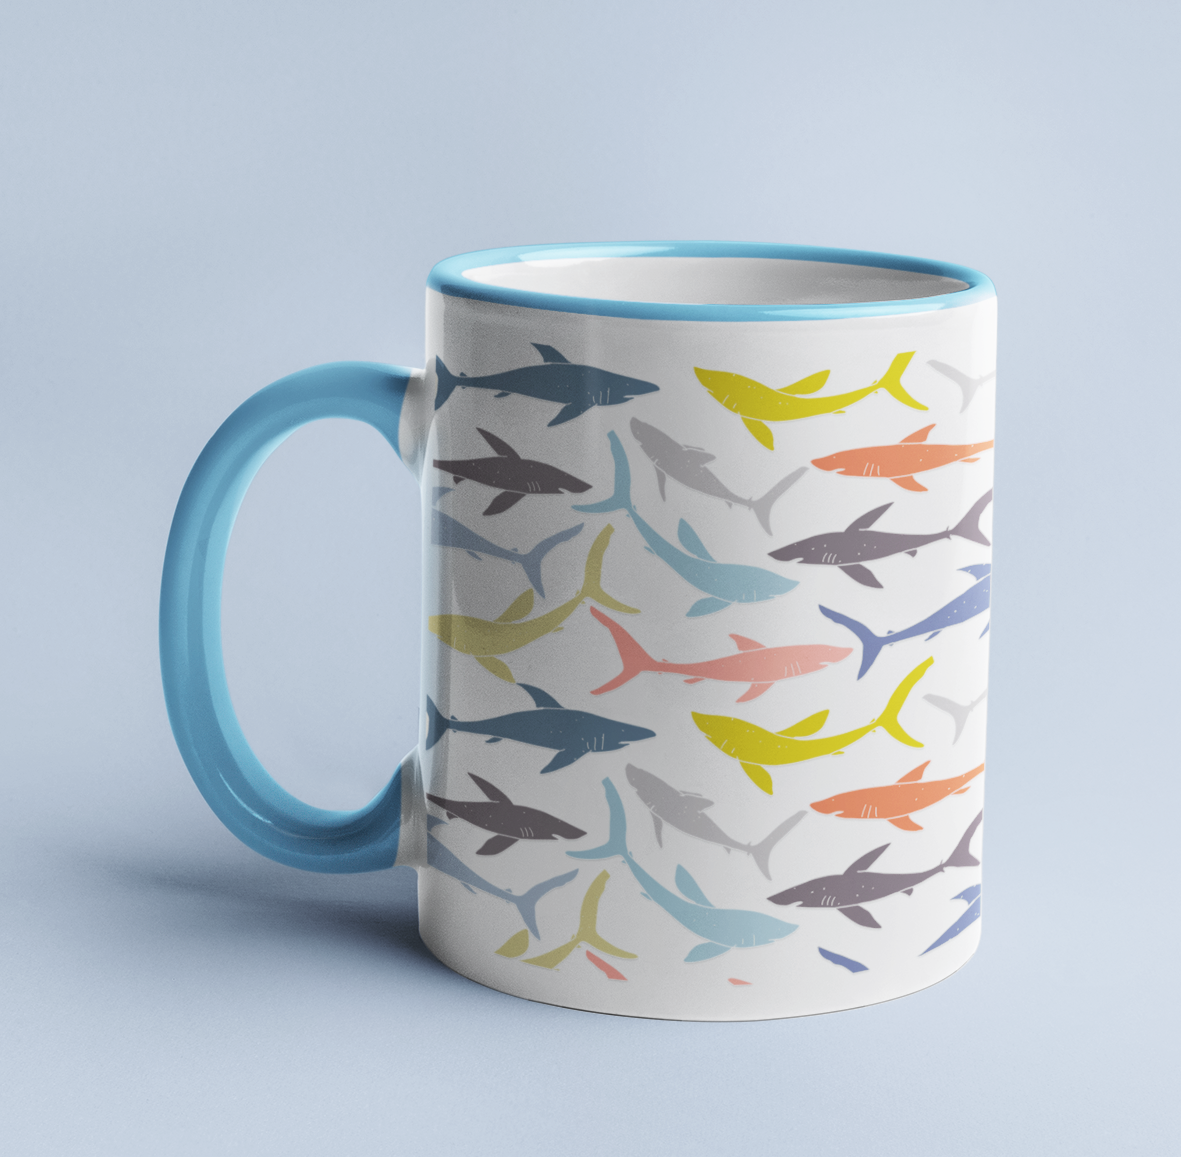 Colorful Reef Sharks Pattern mug on a light blue background, with a light blue handle and rim.